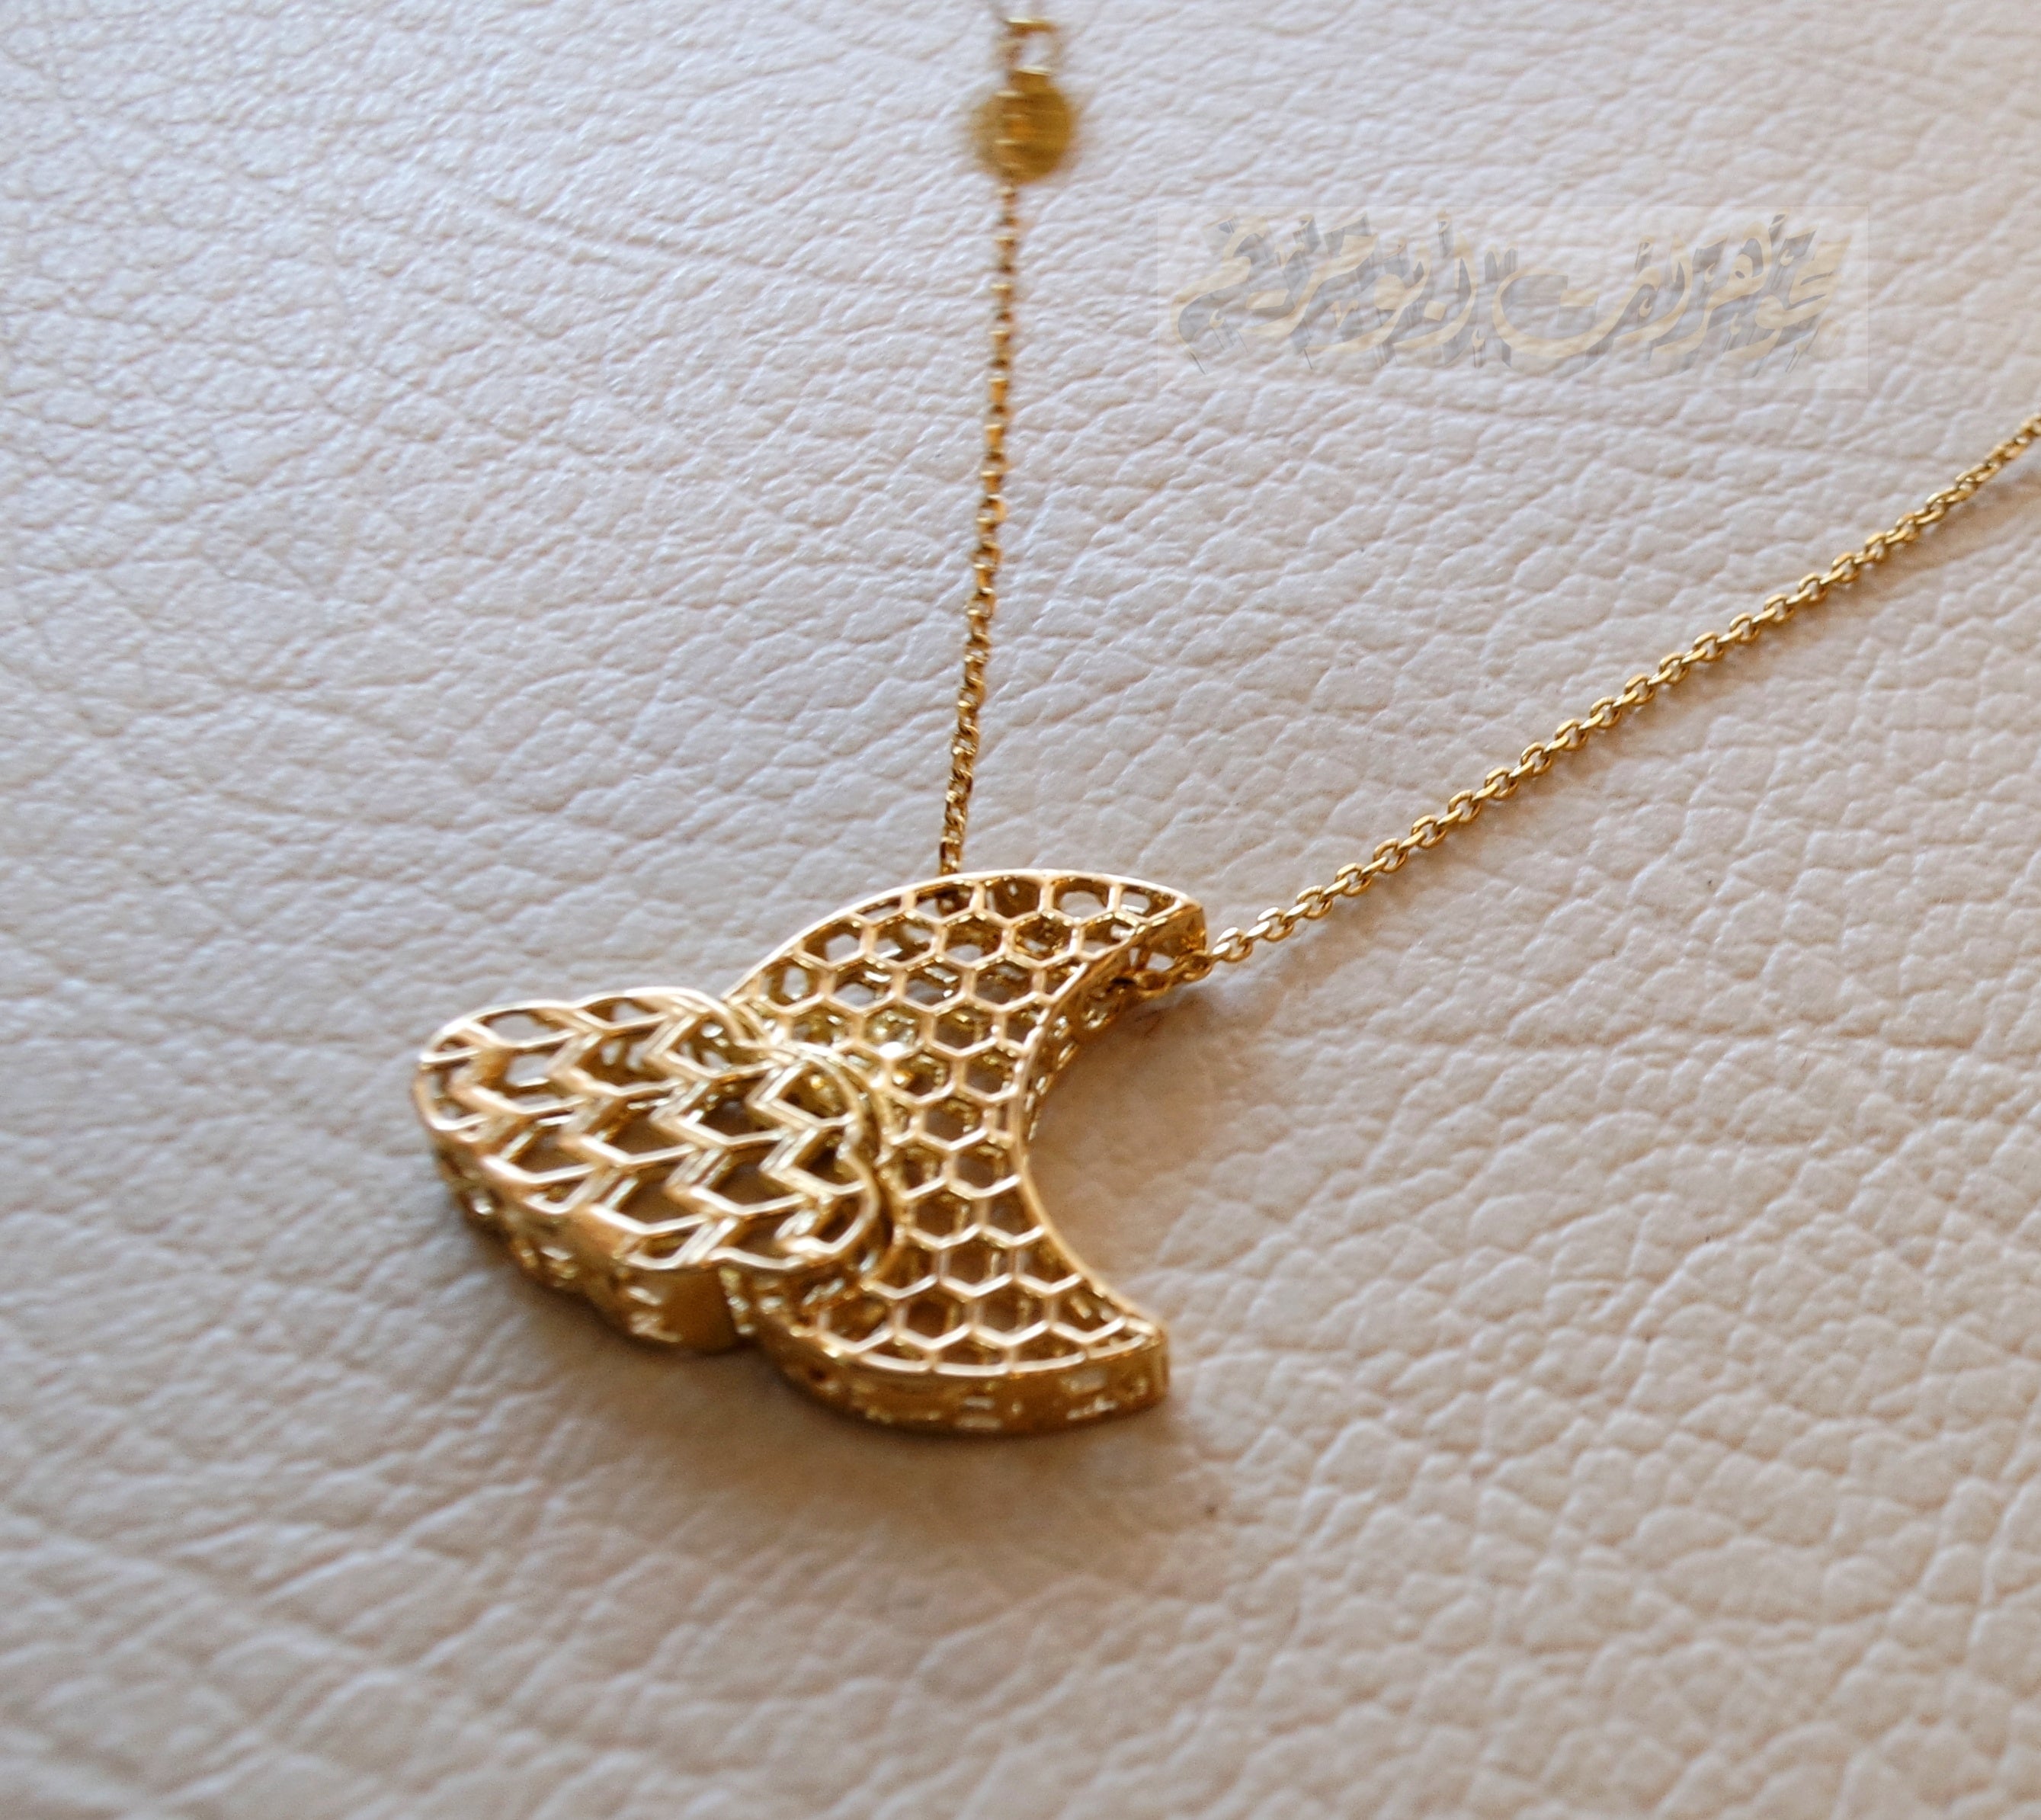 Honeycomb moon and cloud 3d 18K yellow gold necklace pendant and chain fine jewelry full insured shipping